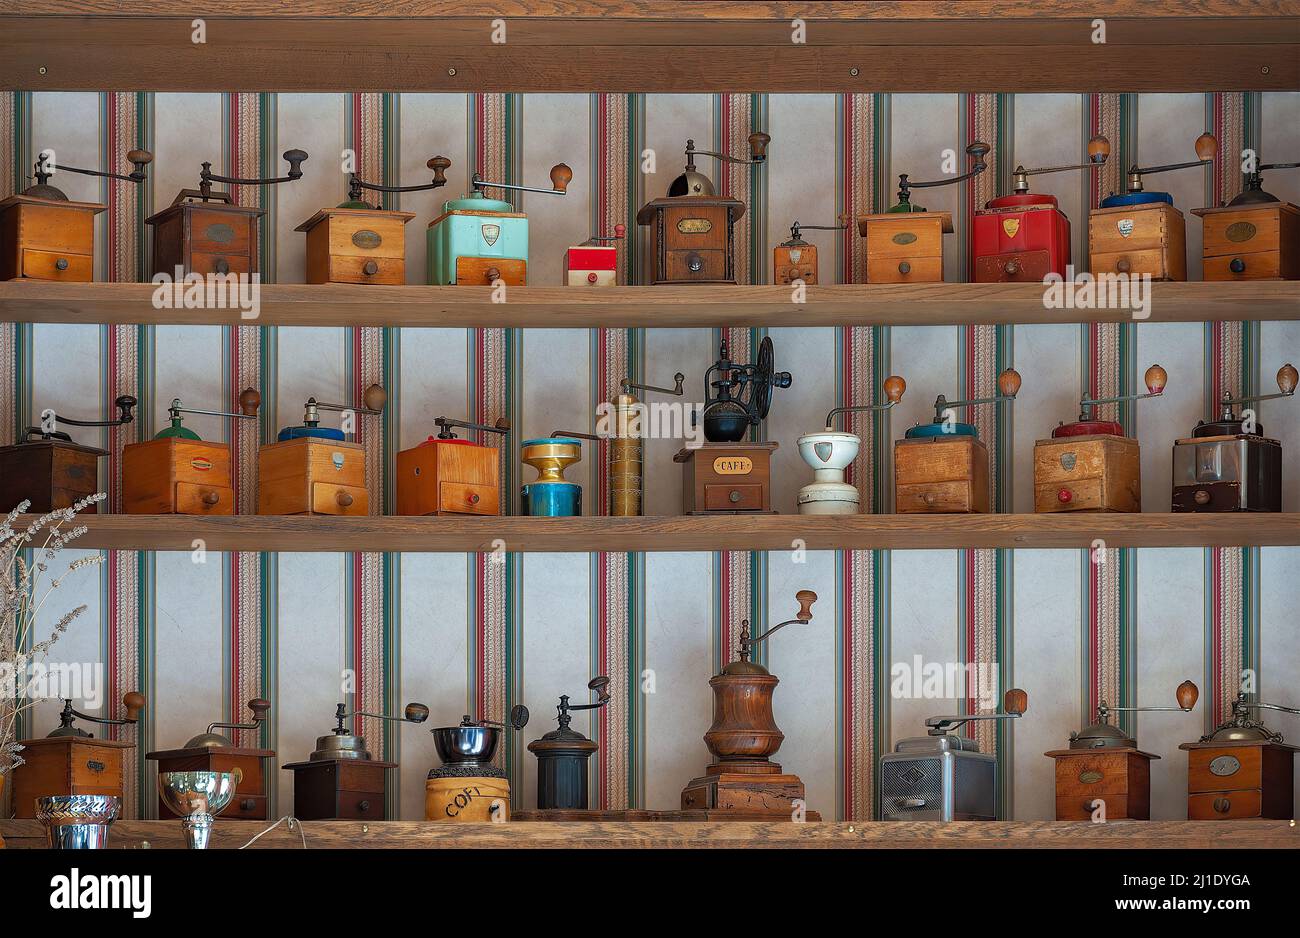 Variety of hand crank coffee grinders on display shelves. Stock Photo